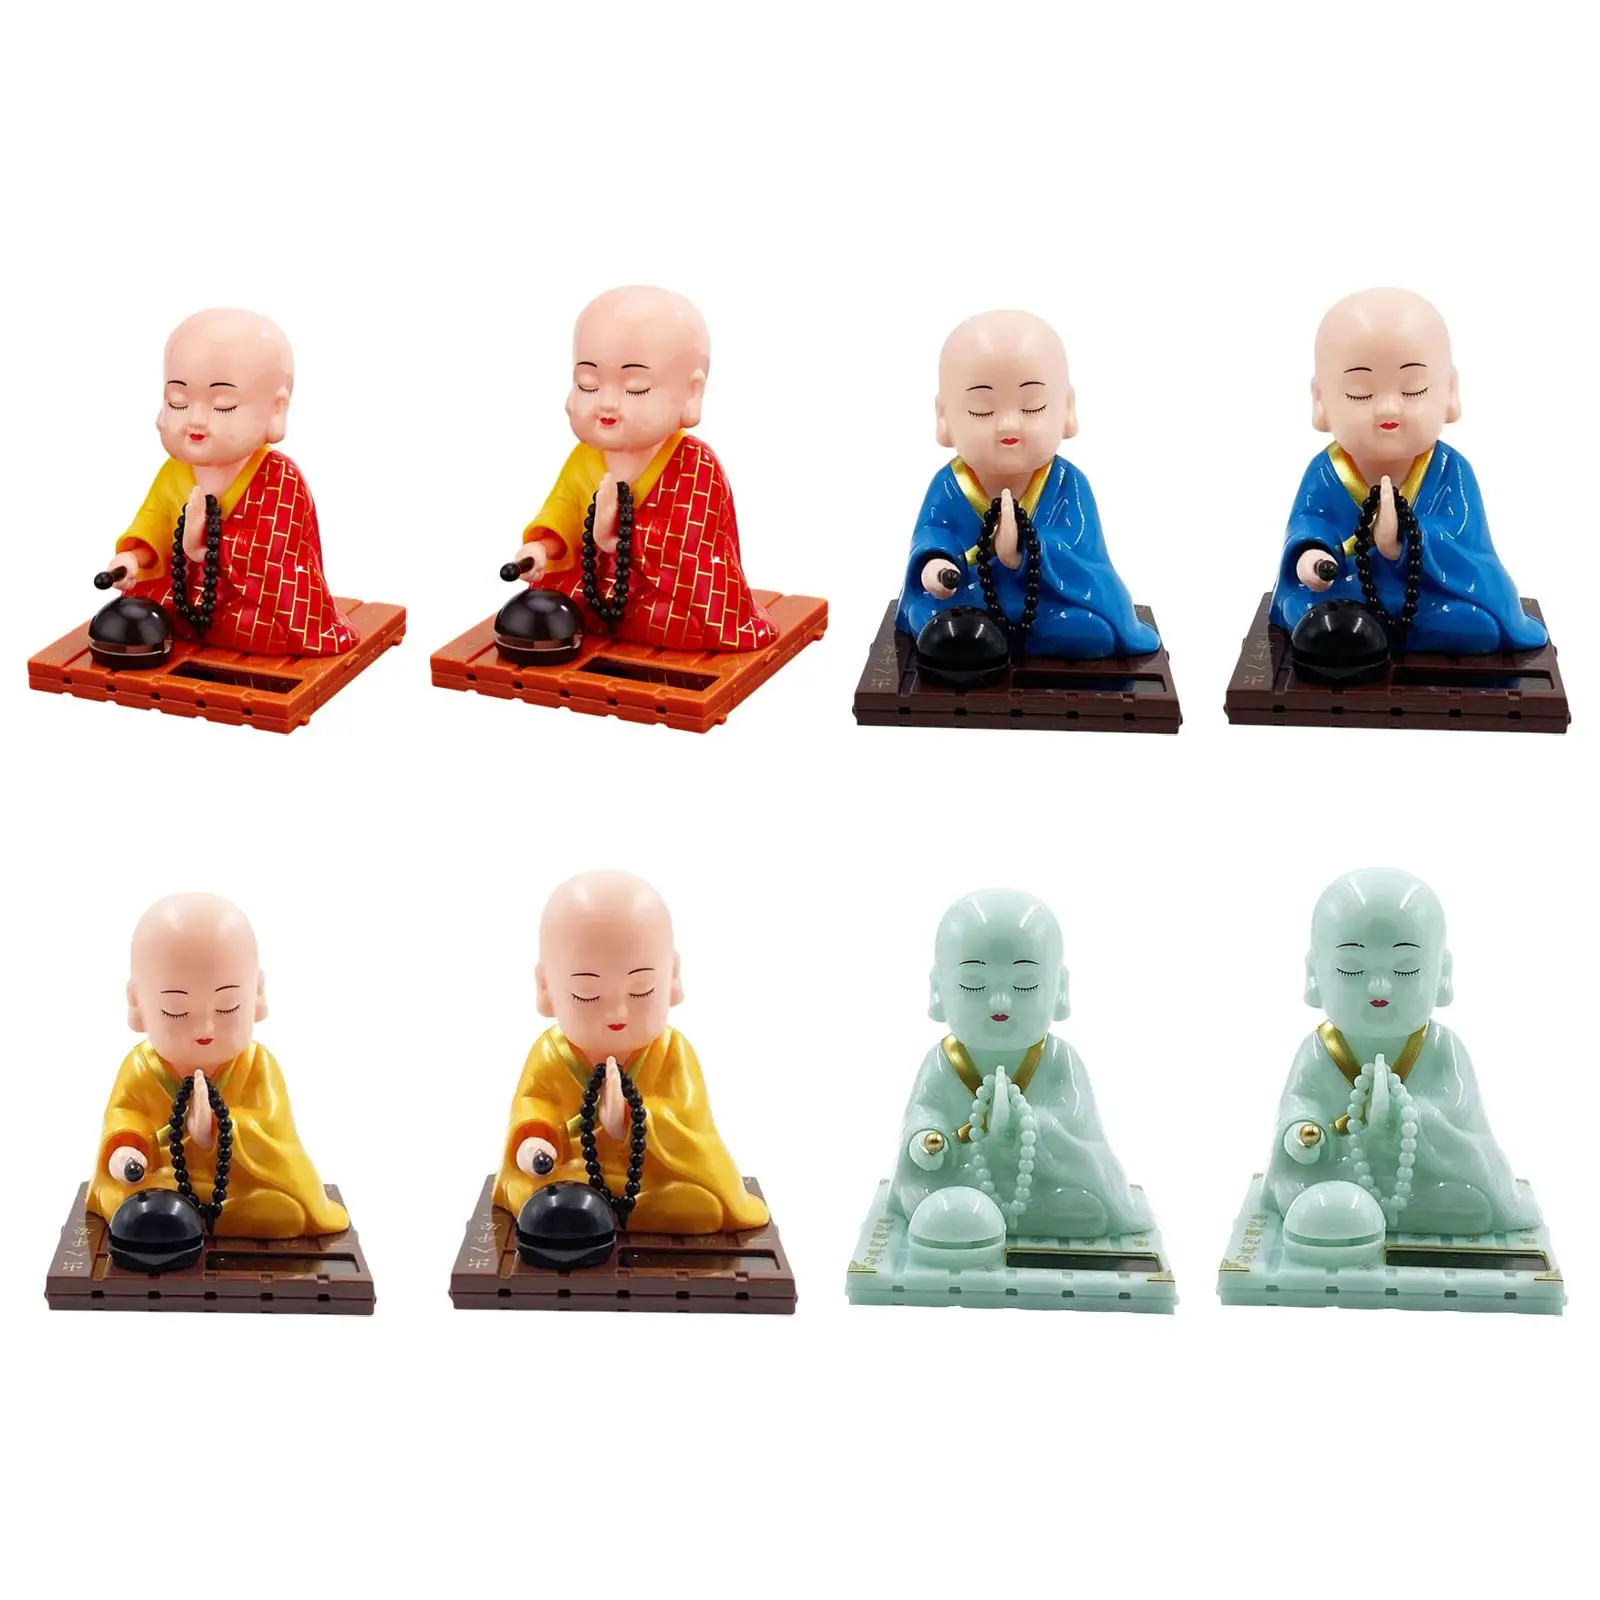 Little Monk Figurine Solar Powered Car Toy Bobble Head Toy Dashboard Decoration Buddha Monks Statue Car Ornament for Home Decor